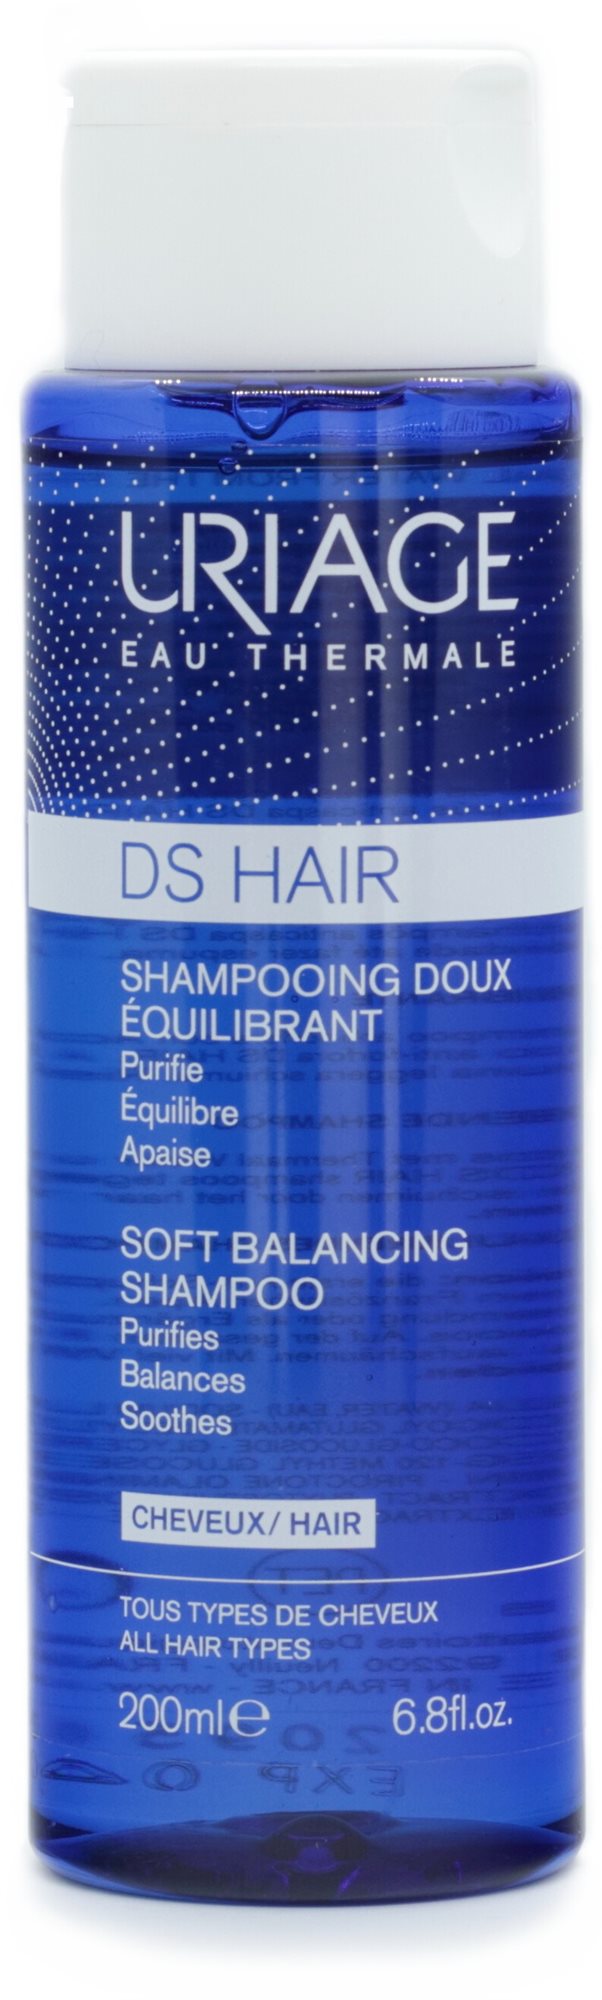 Sampon URIAGE D.S. Hair Equilibrant 200 ml